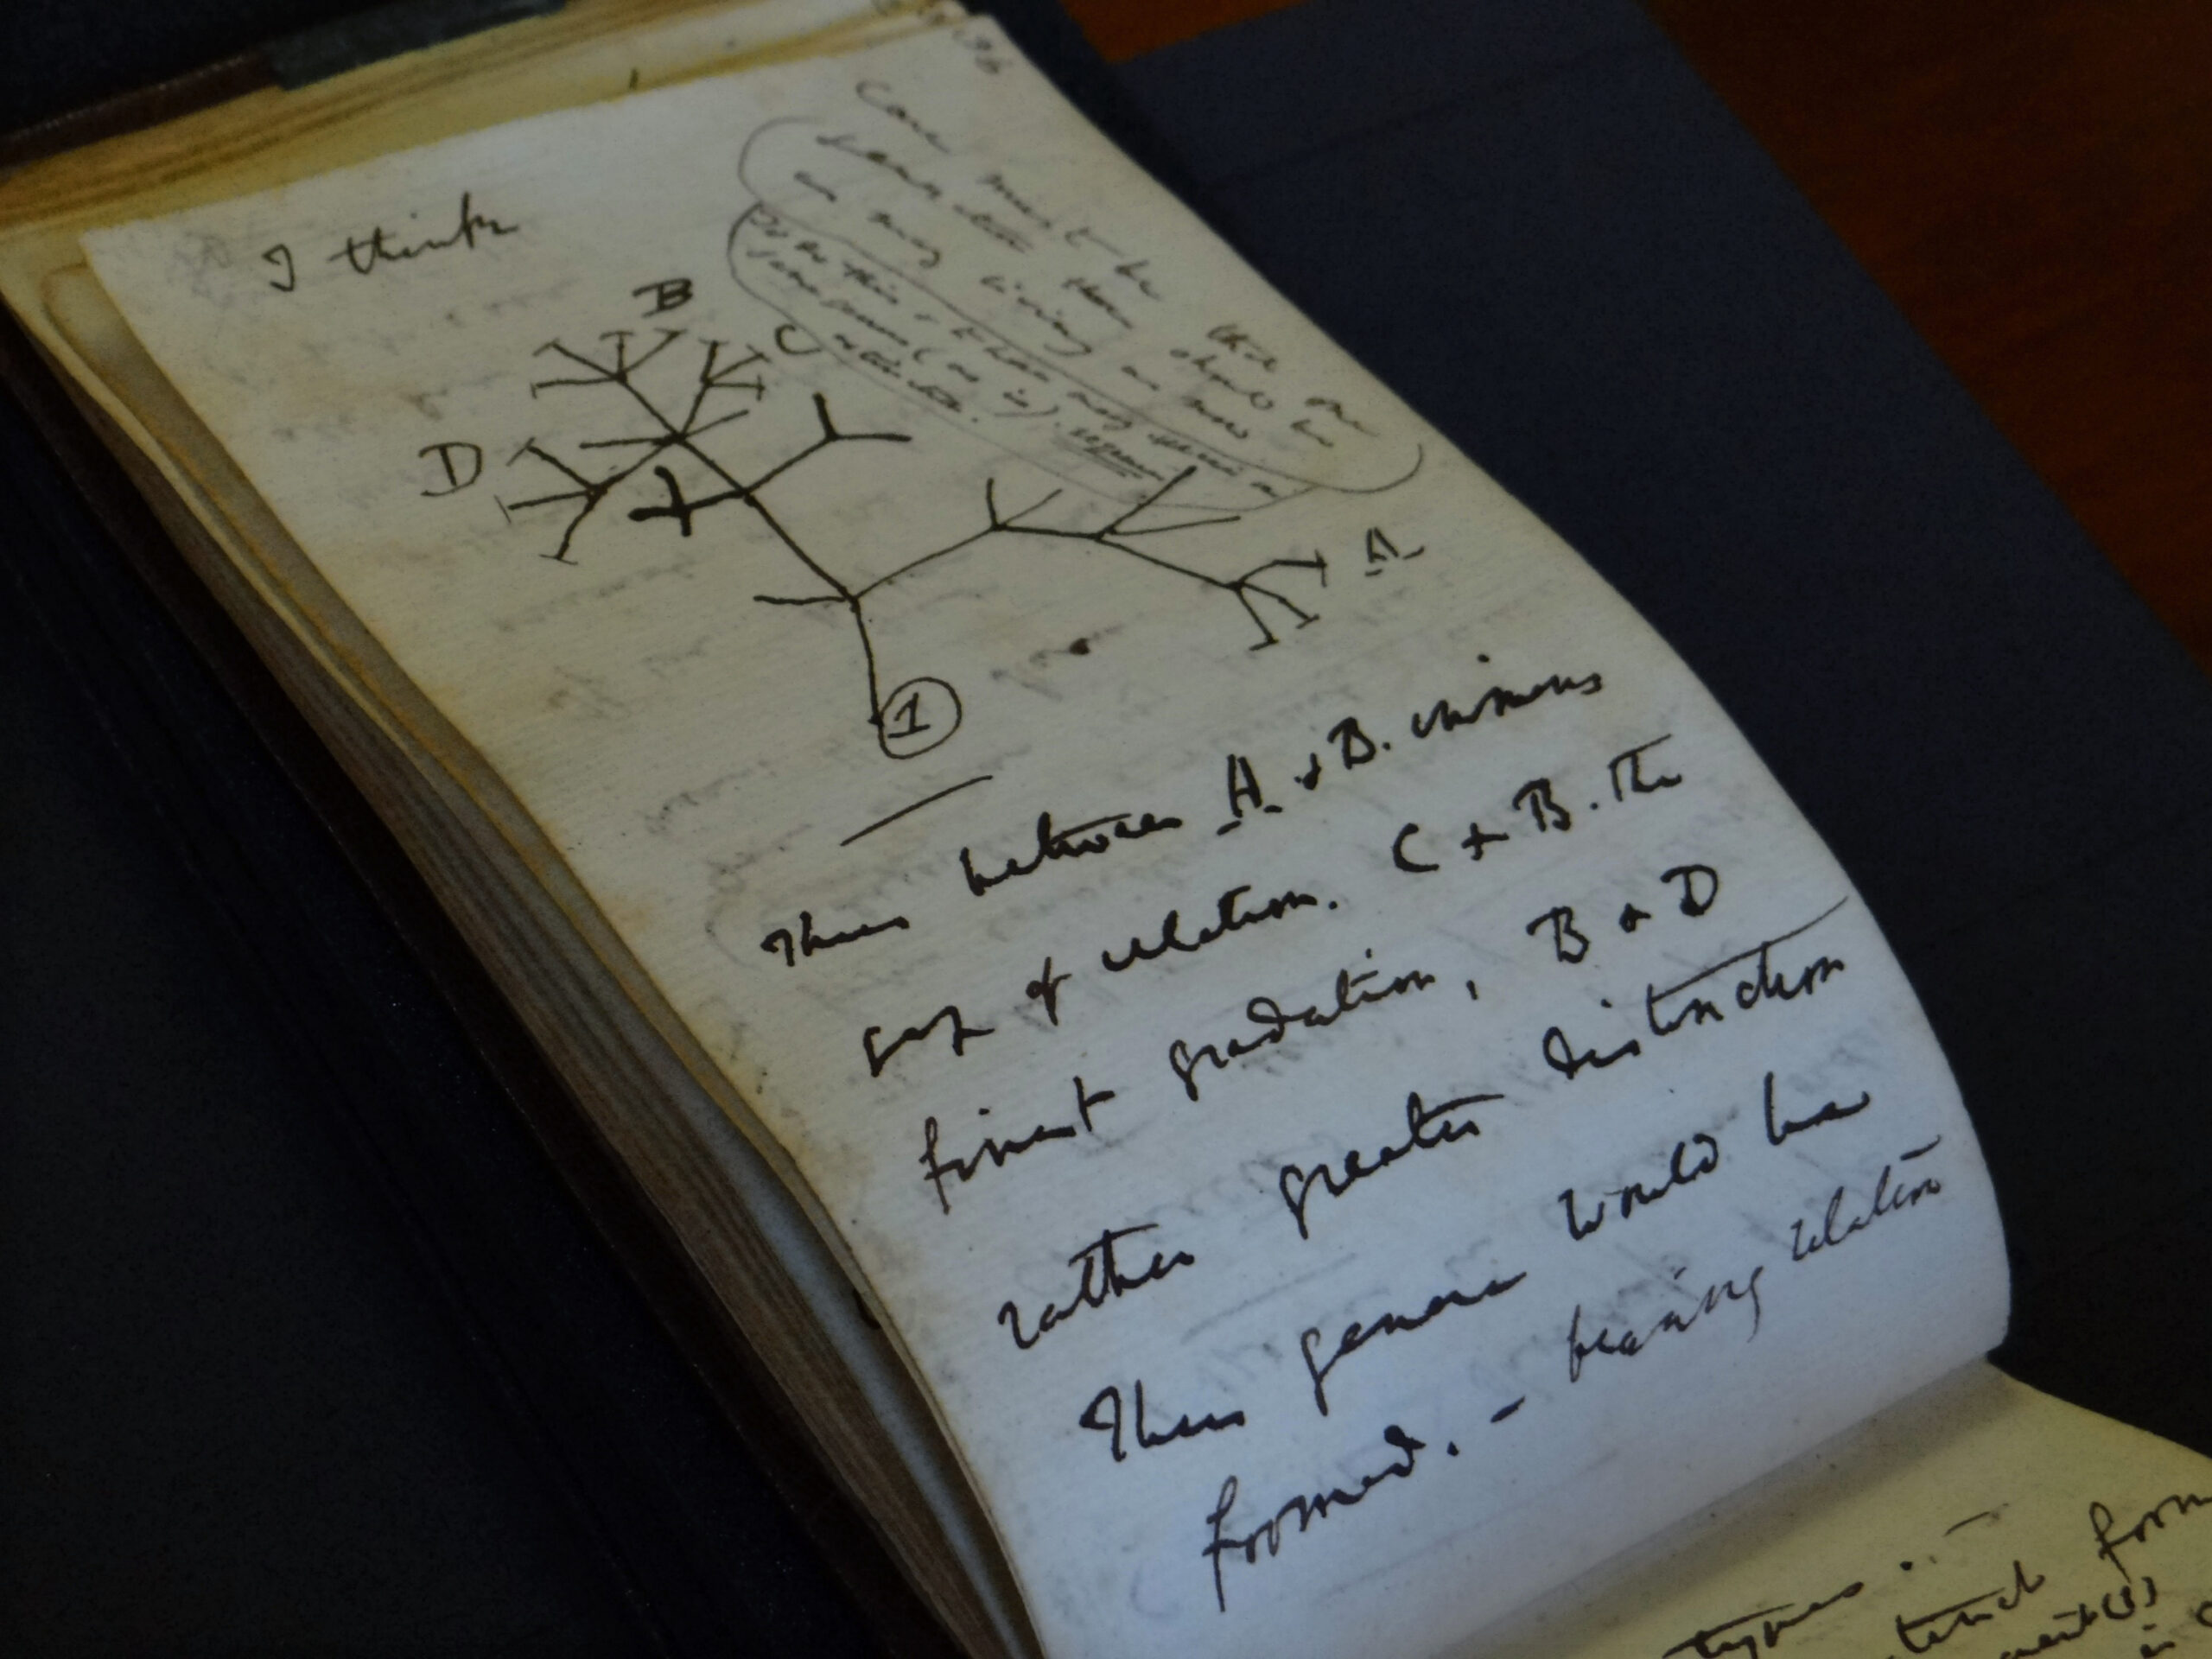 Darwin Notebooks Missing for 20 Years Returned to Cambridge